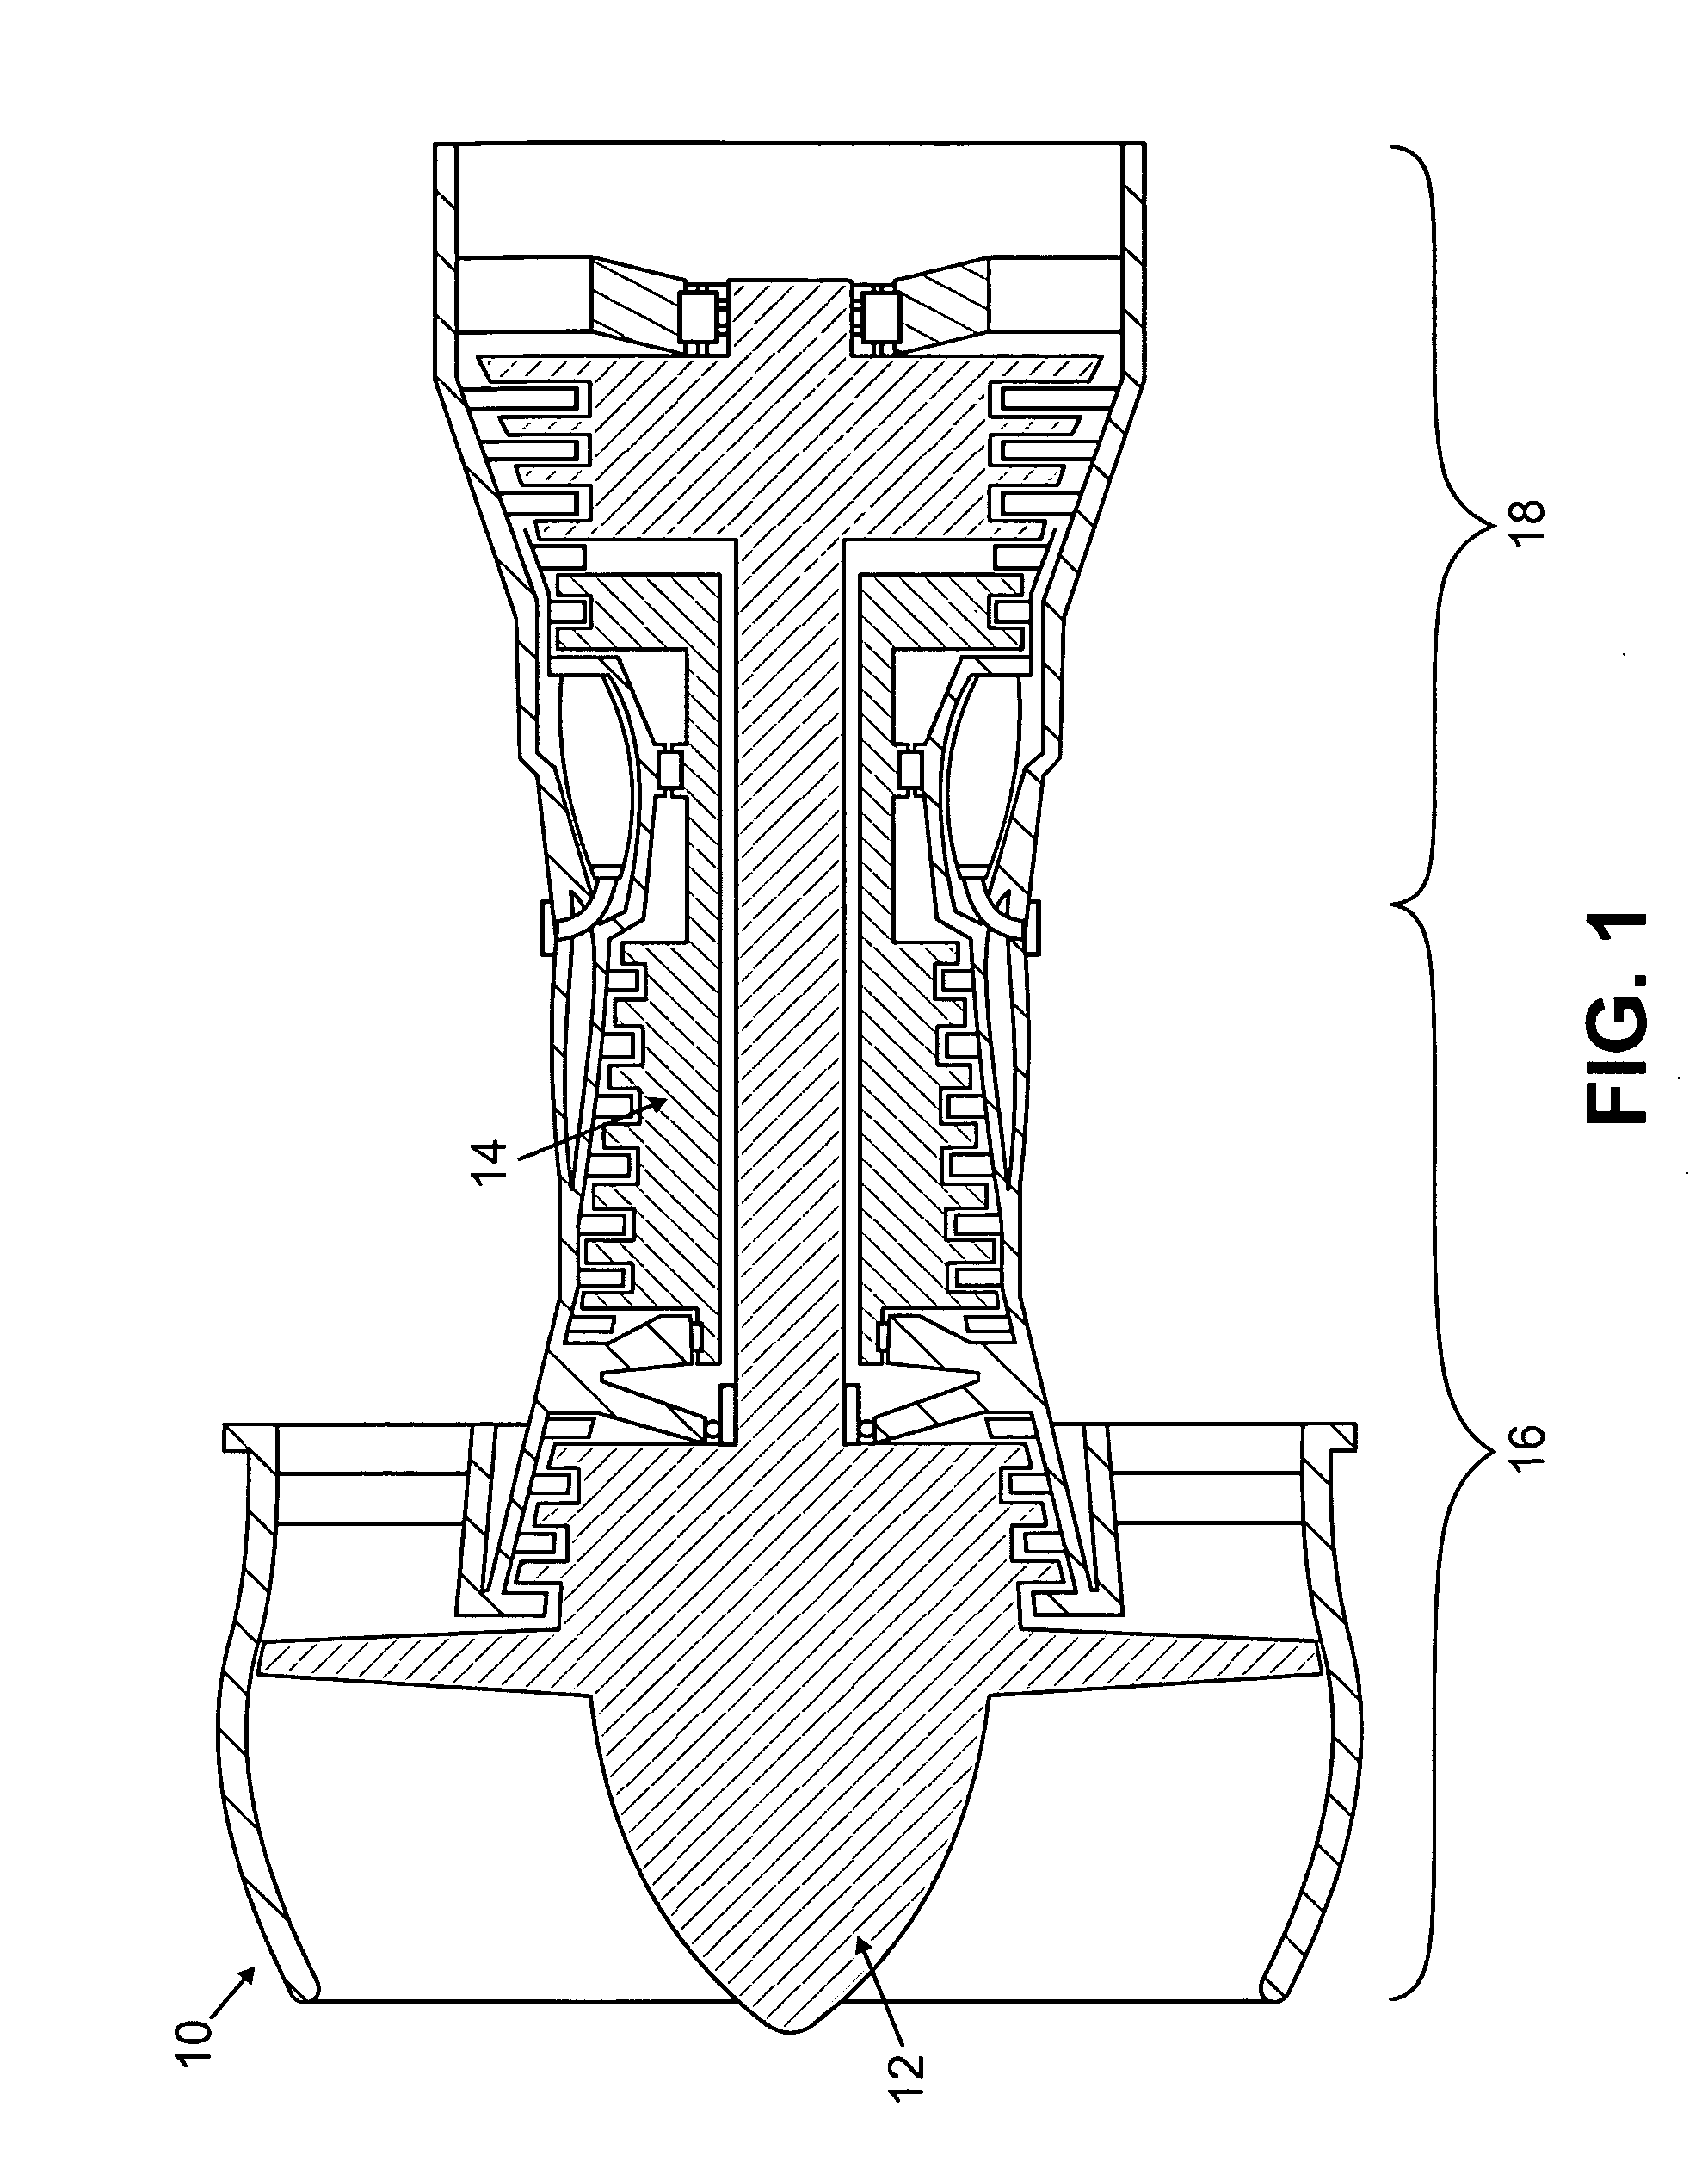 On-demand lubrication system and method for improved flow management and containment